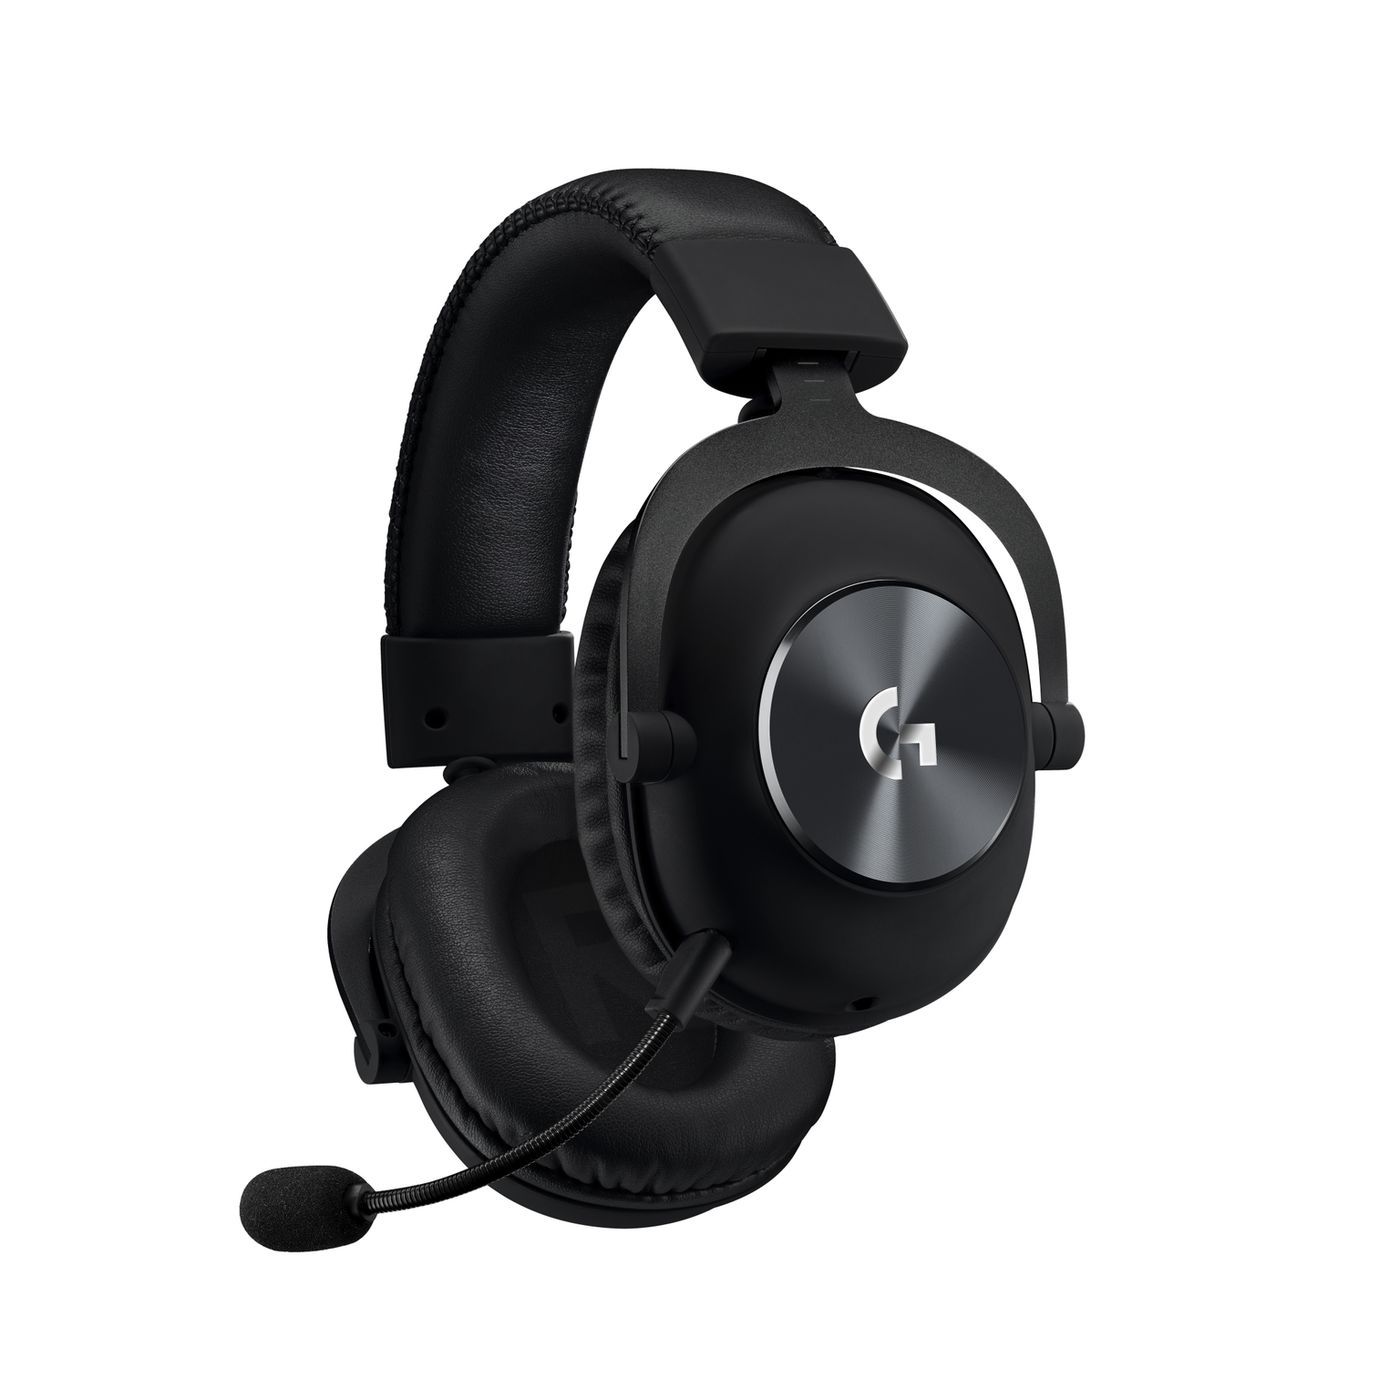 Logitech Pro Gaming Headset for PC